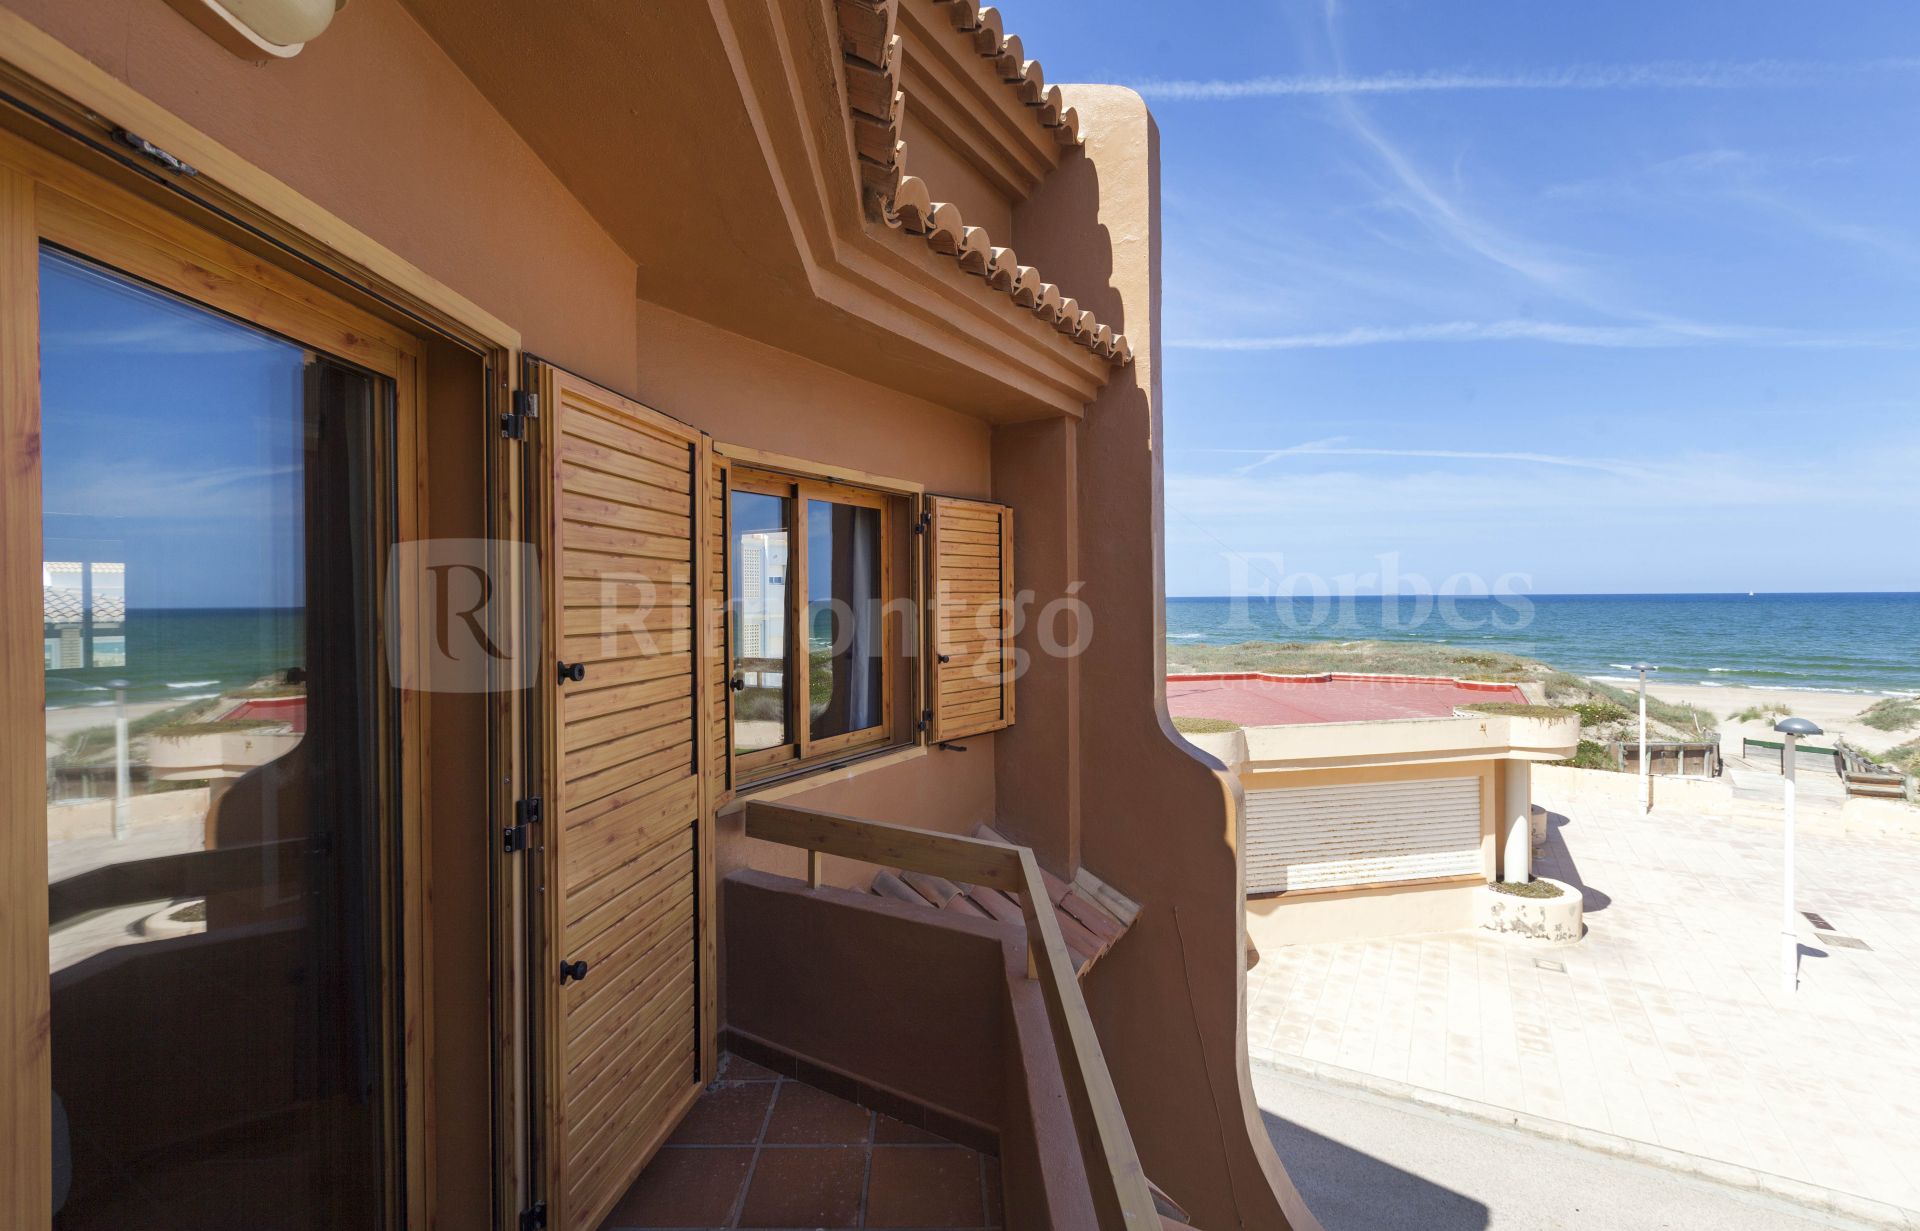 Exceptional terraced property in perfect condition located in the Les Gavines del Perellonet urbanisation, close to the city of Valencia. The property has views of the Mediterranean sea and the beach.